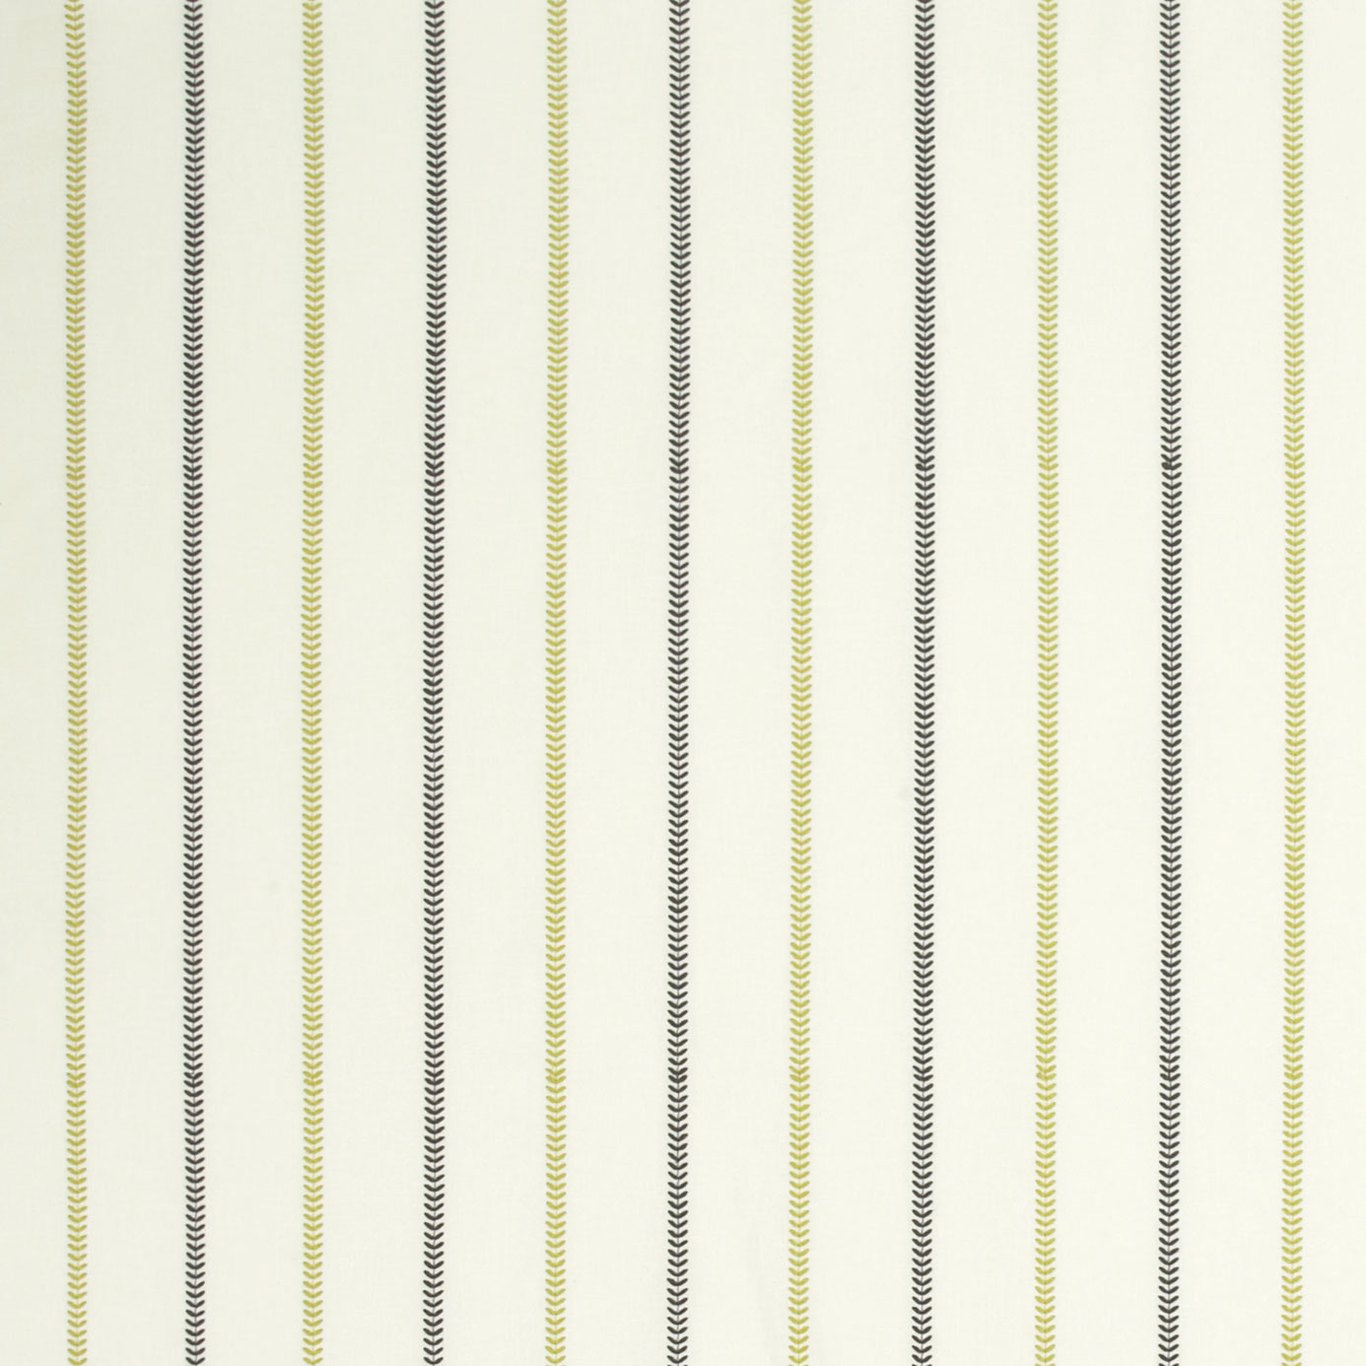 Enya Chartreuse/Charcoal Fabric by STG